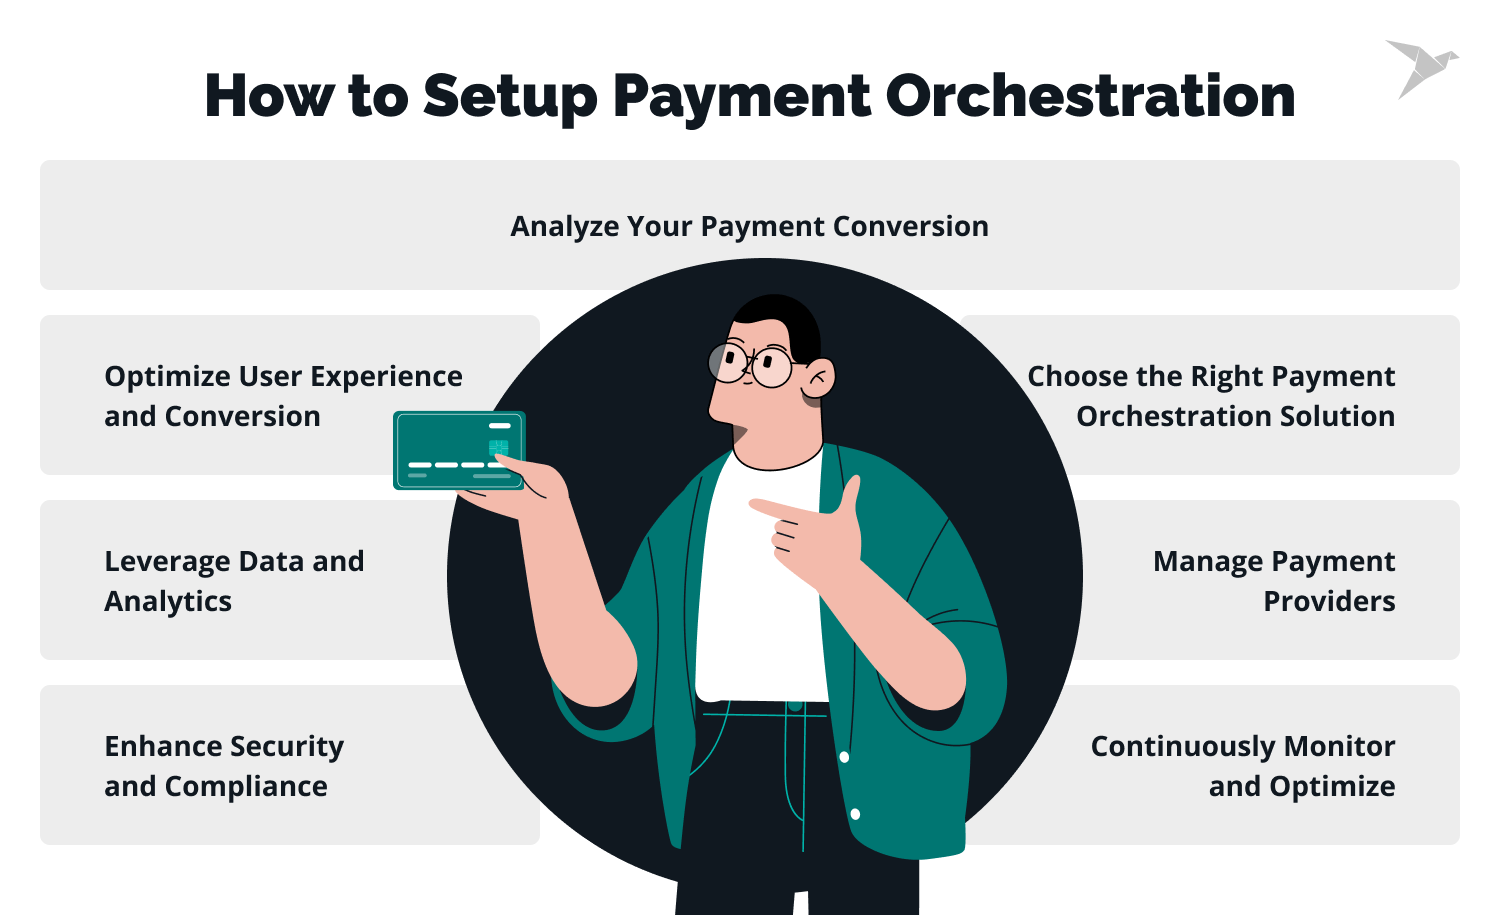 How to Setup Payment Orchestration